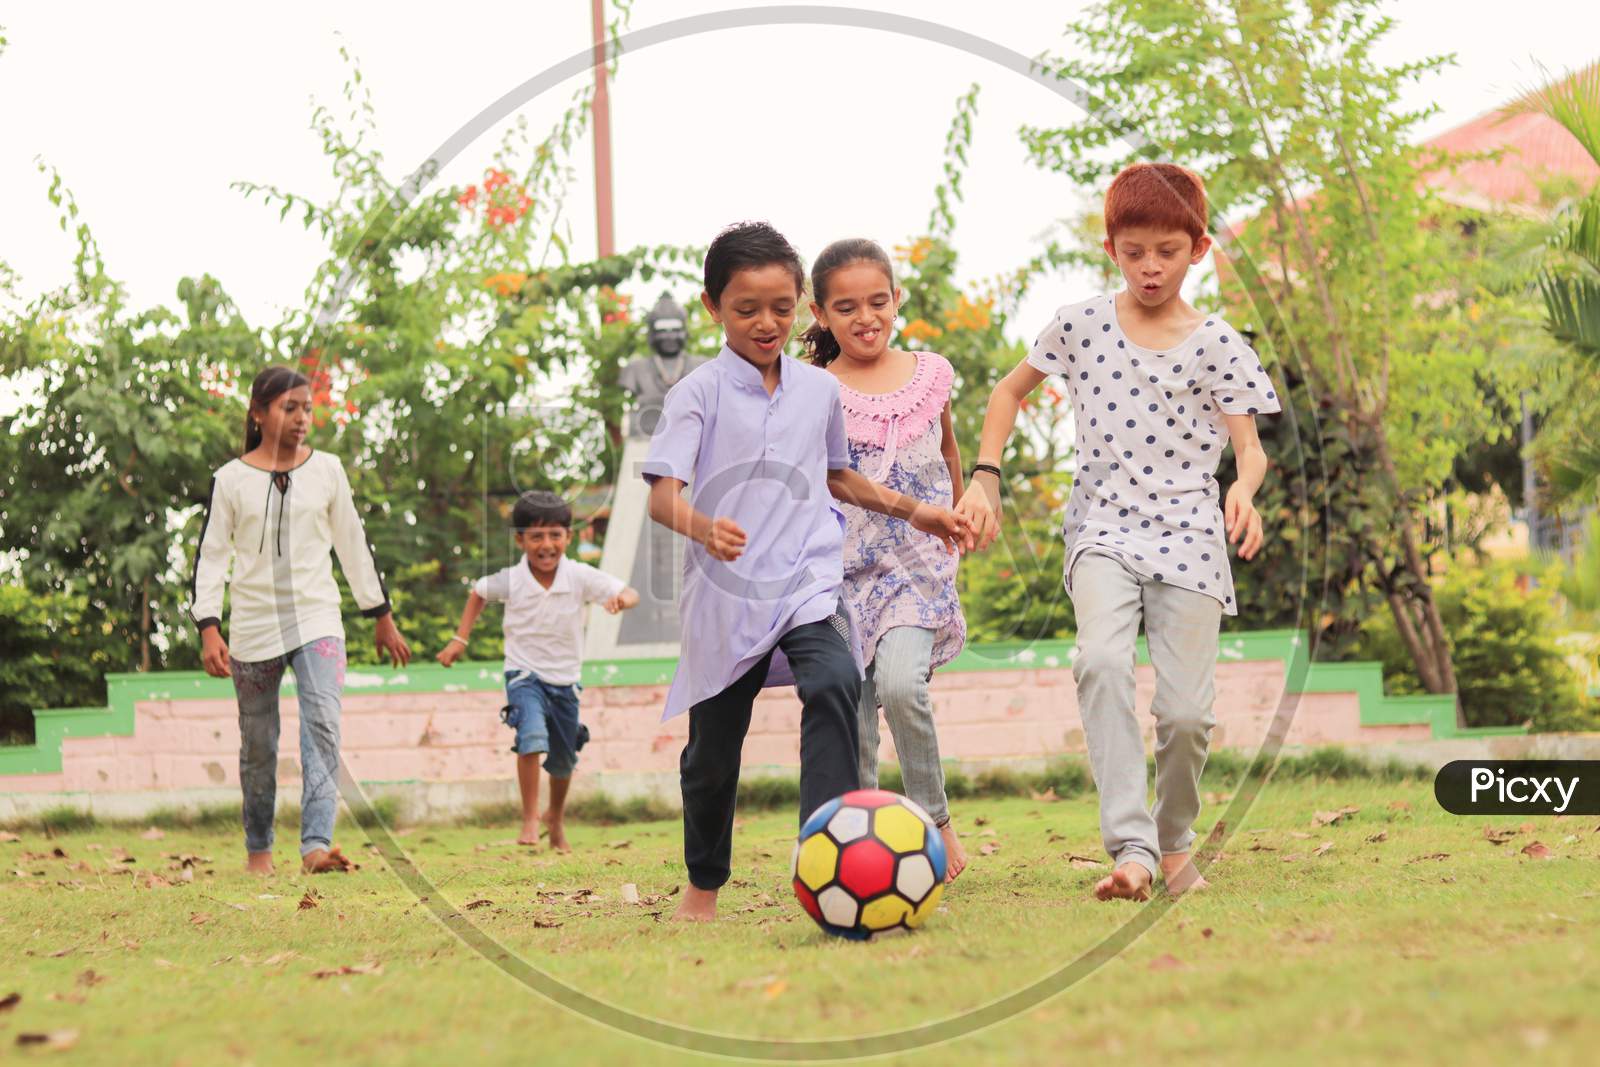 Children Playing Football Outdoor Game - Concept Of Kids Enjoying Outdoor Games In Technology-Driven World.